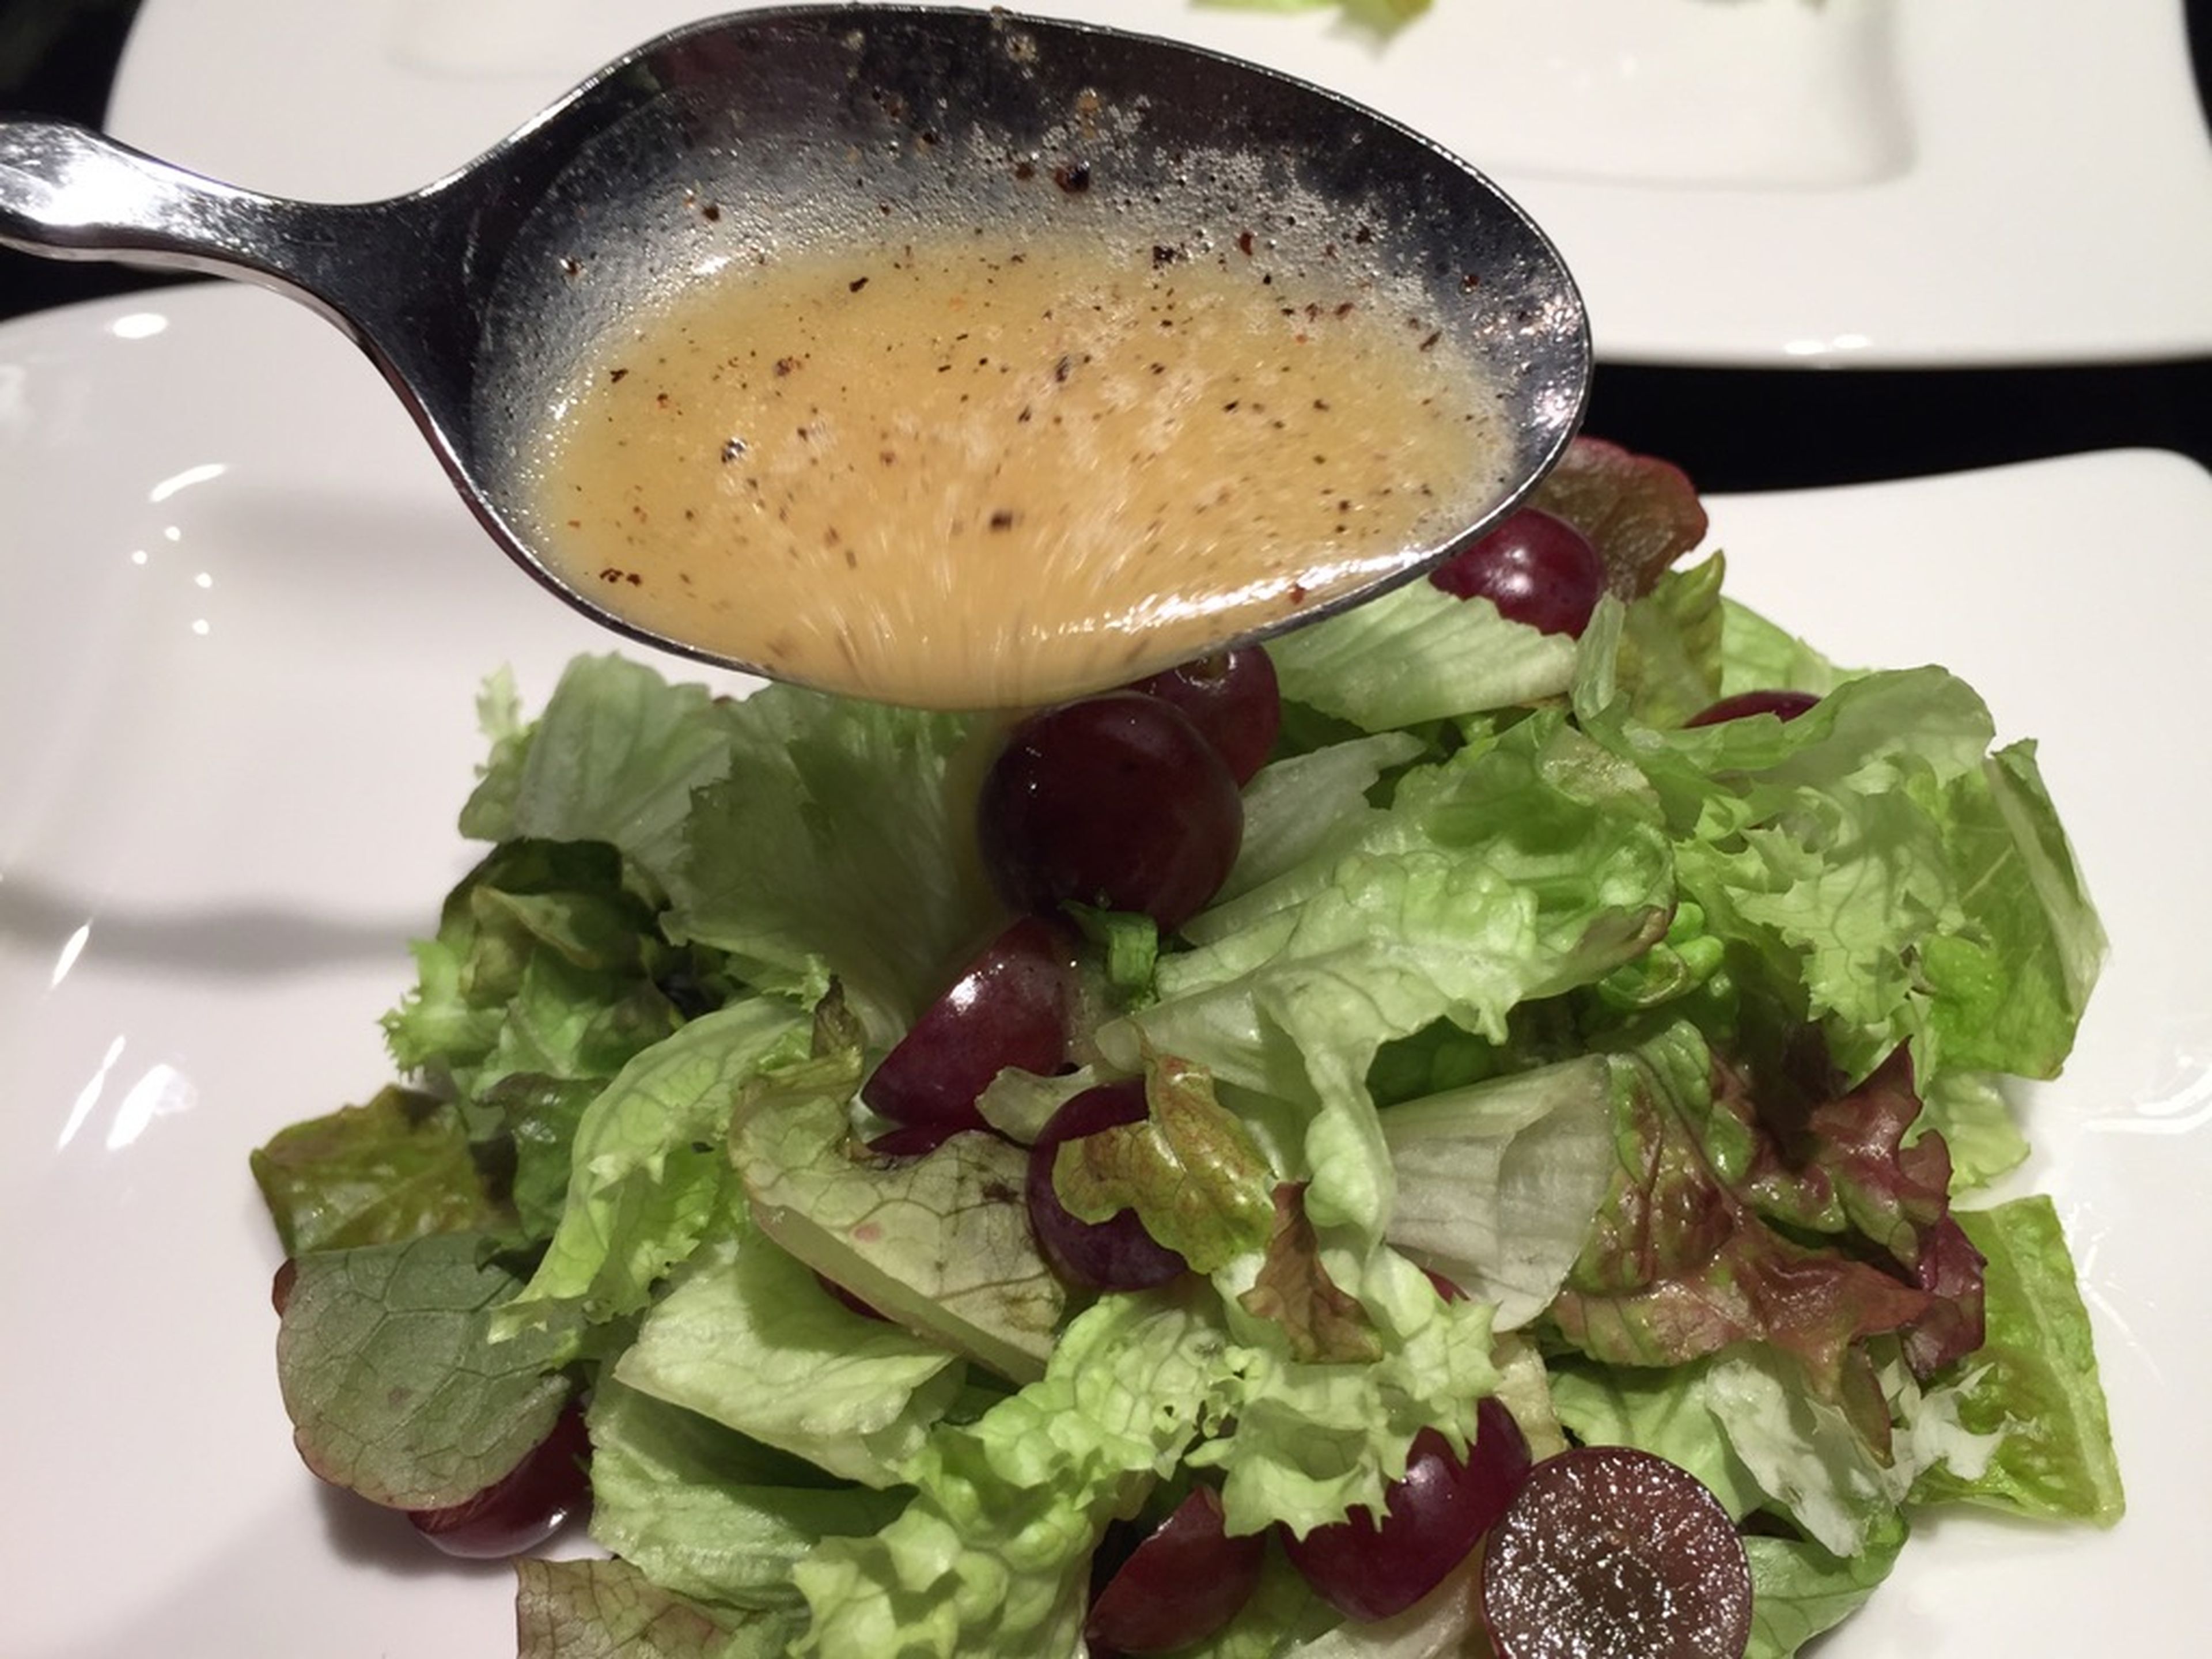 Mix honey, oil, vinegar, orange juice, salt, and pepper to make the sauce. Drizzle over the salad.